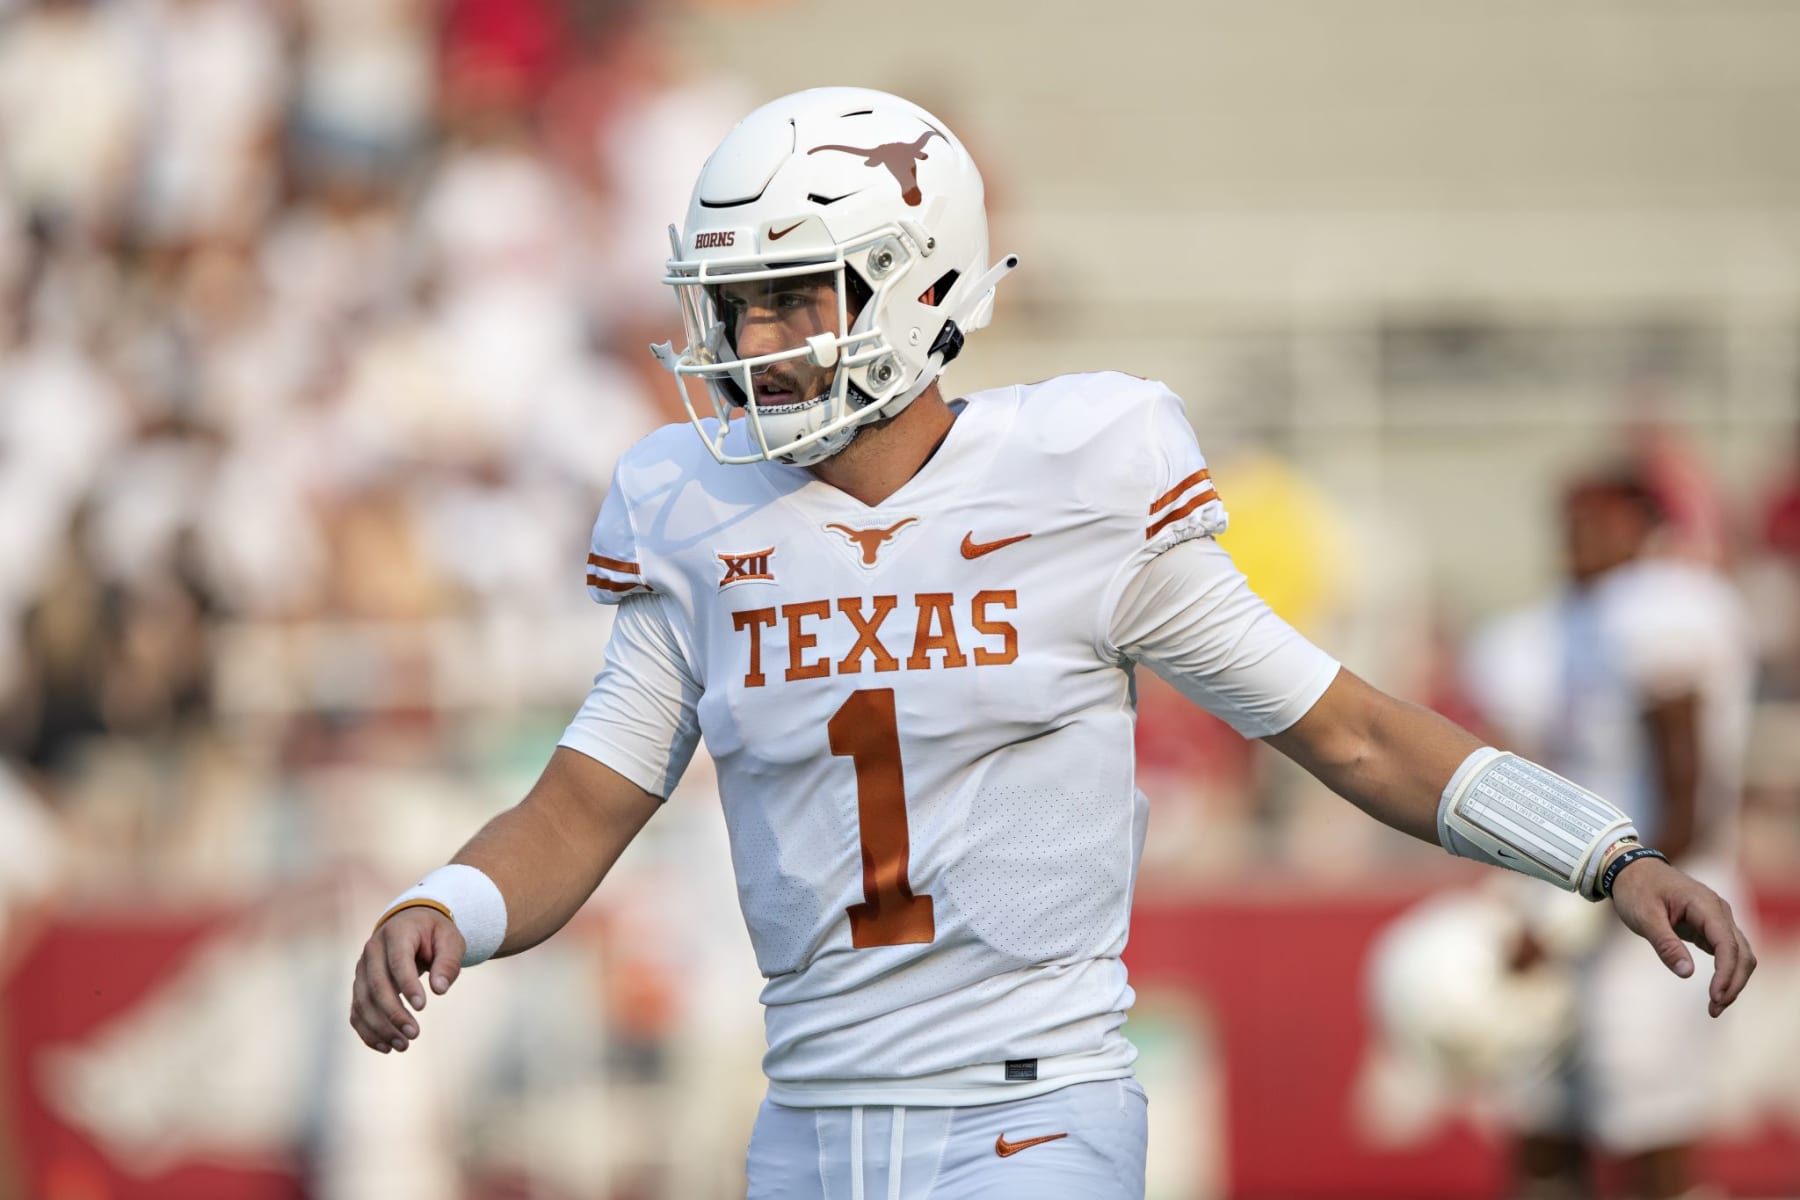 Utilizing the transfer portal helped Texas continue success in 2023